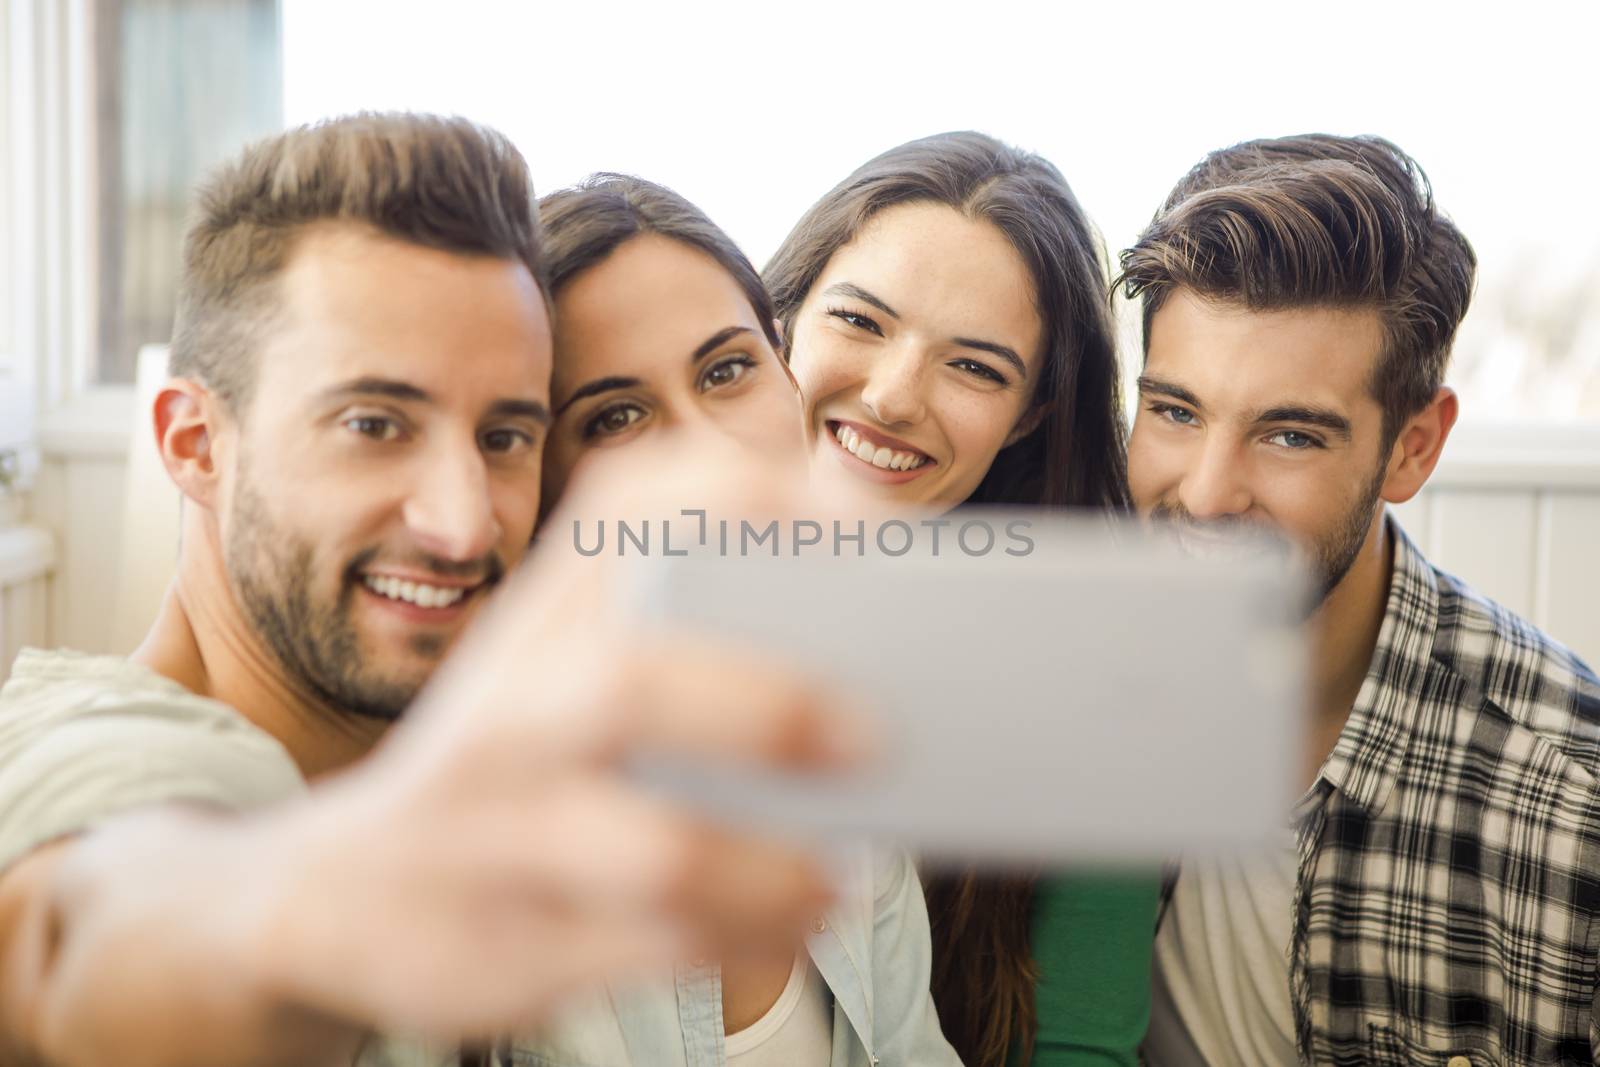 A selfie with friends by Iko